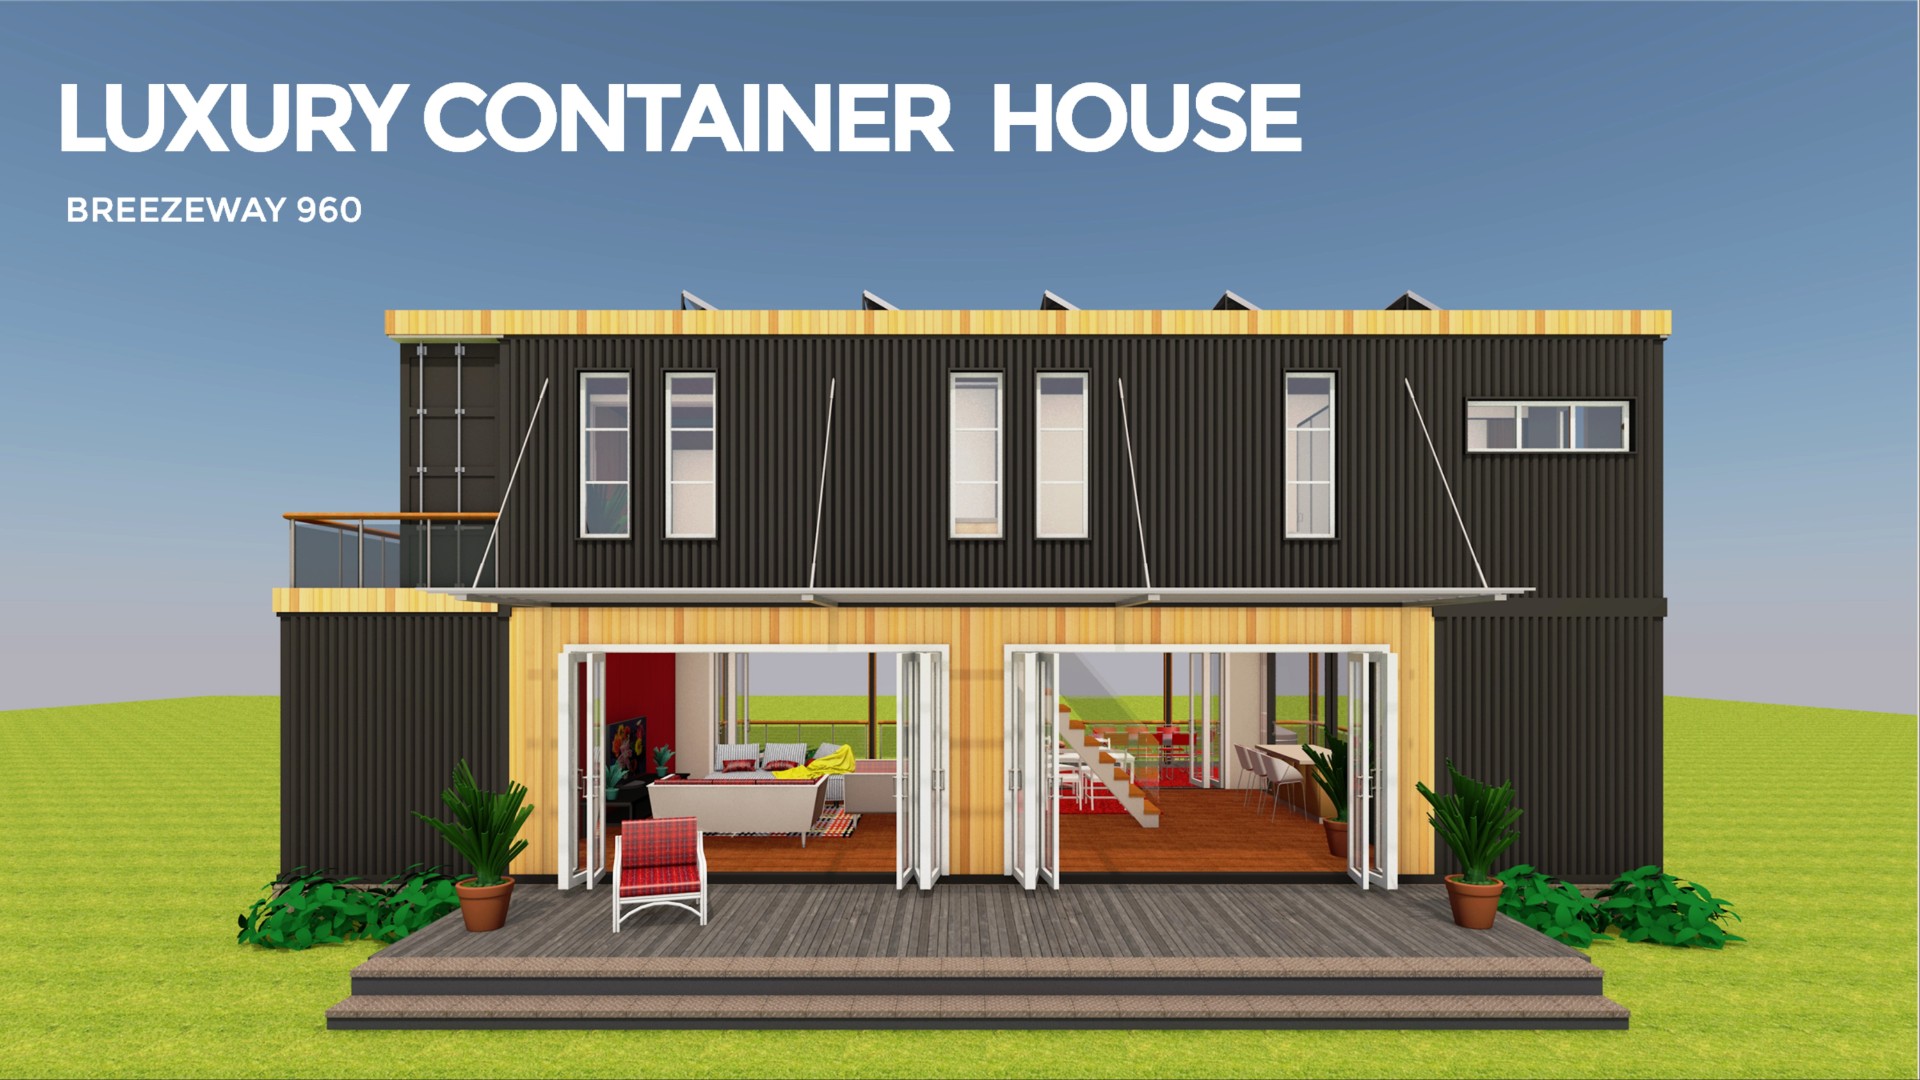 Luxury Shipping Container House Design with a Breezeway | BREEZEWAY 960